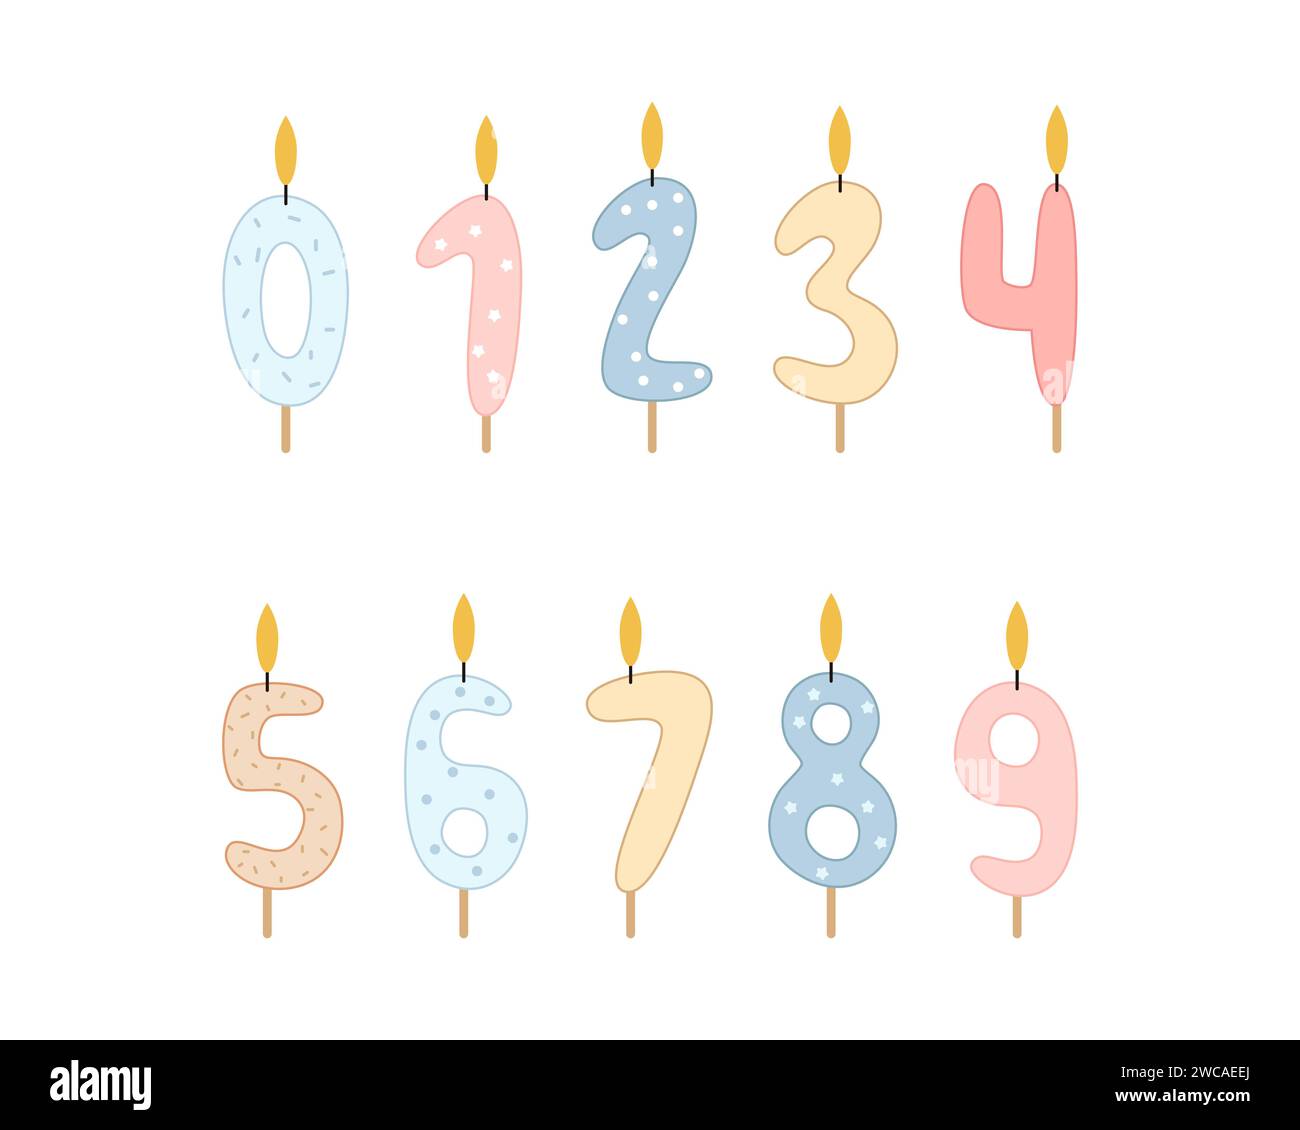 A set of candles in the form of numbers from 0 to 9 for decorating birthday cakes and cupcakes. Vector illustration on a white background. Stock Vector